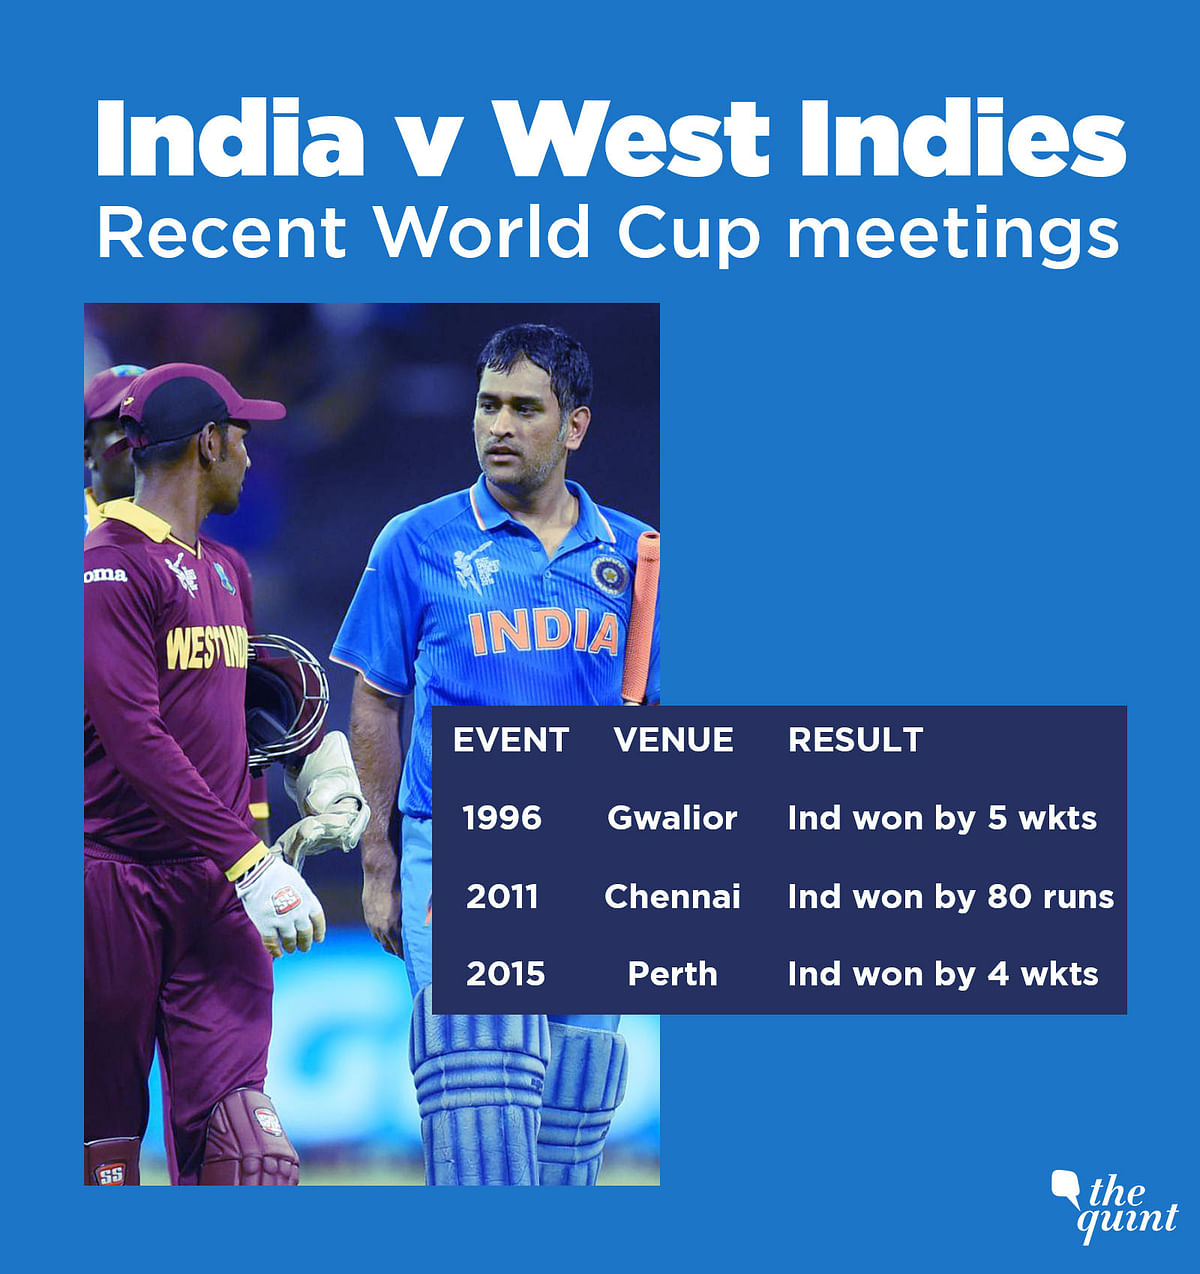 But against West Indies, the Indian team cannot afford to be ‘not switched on completely’ at Manchester.